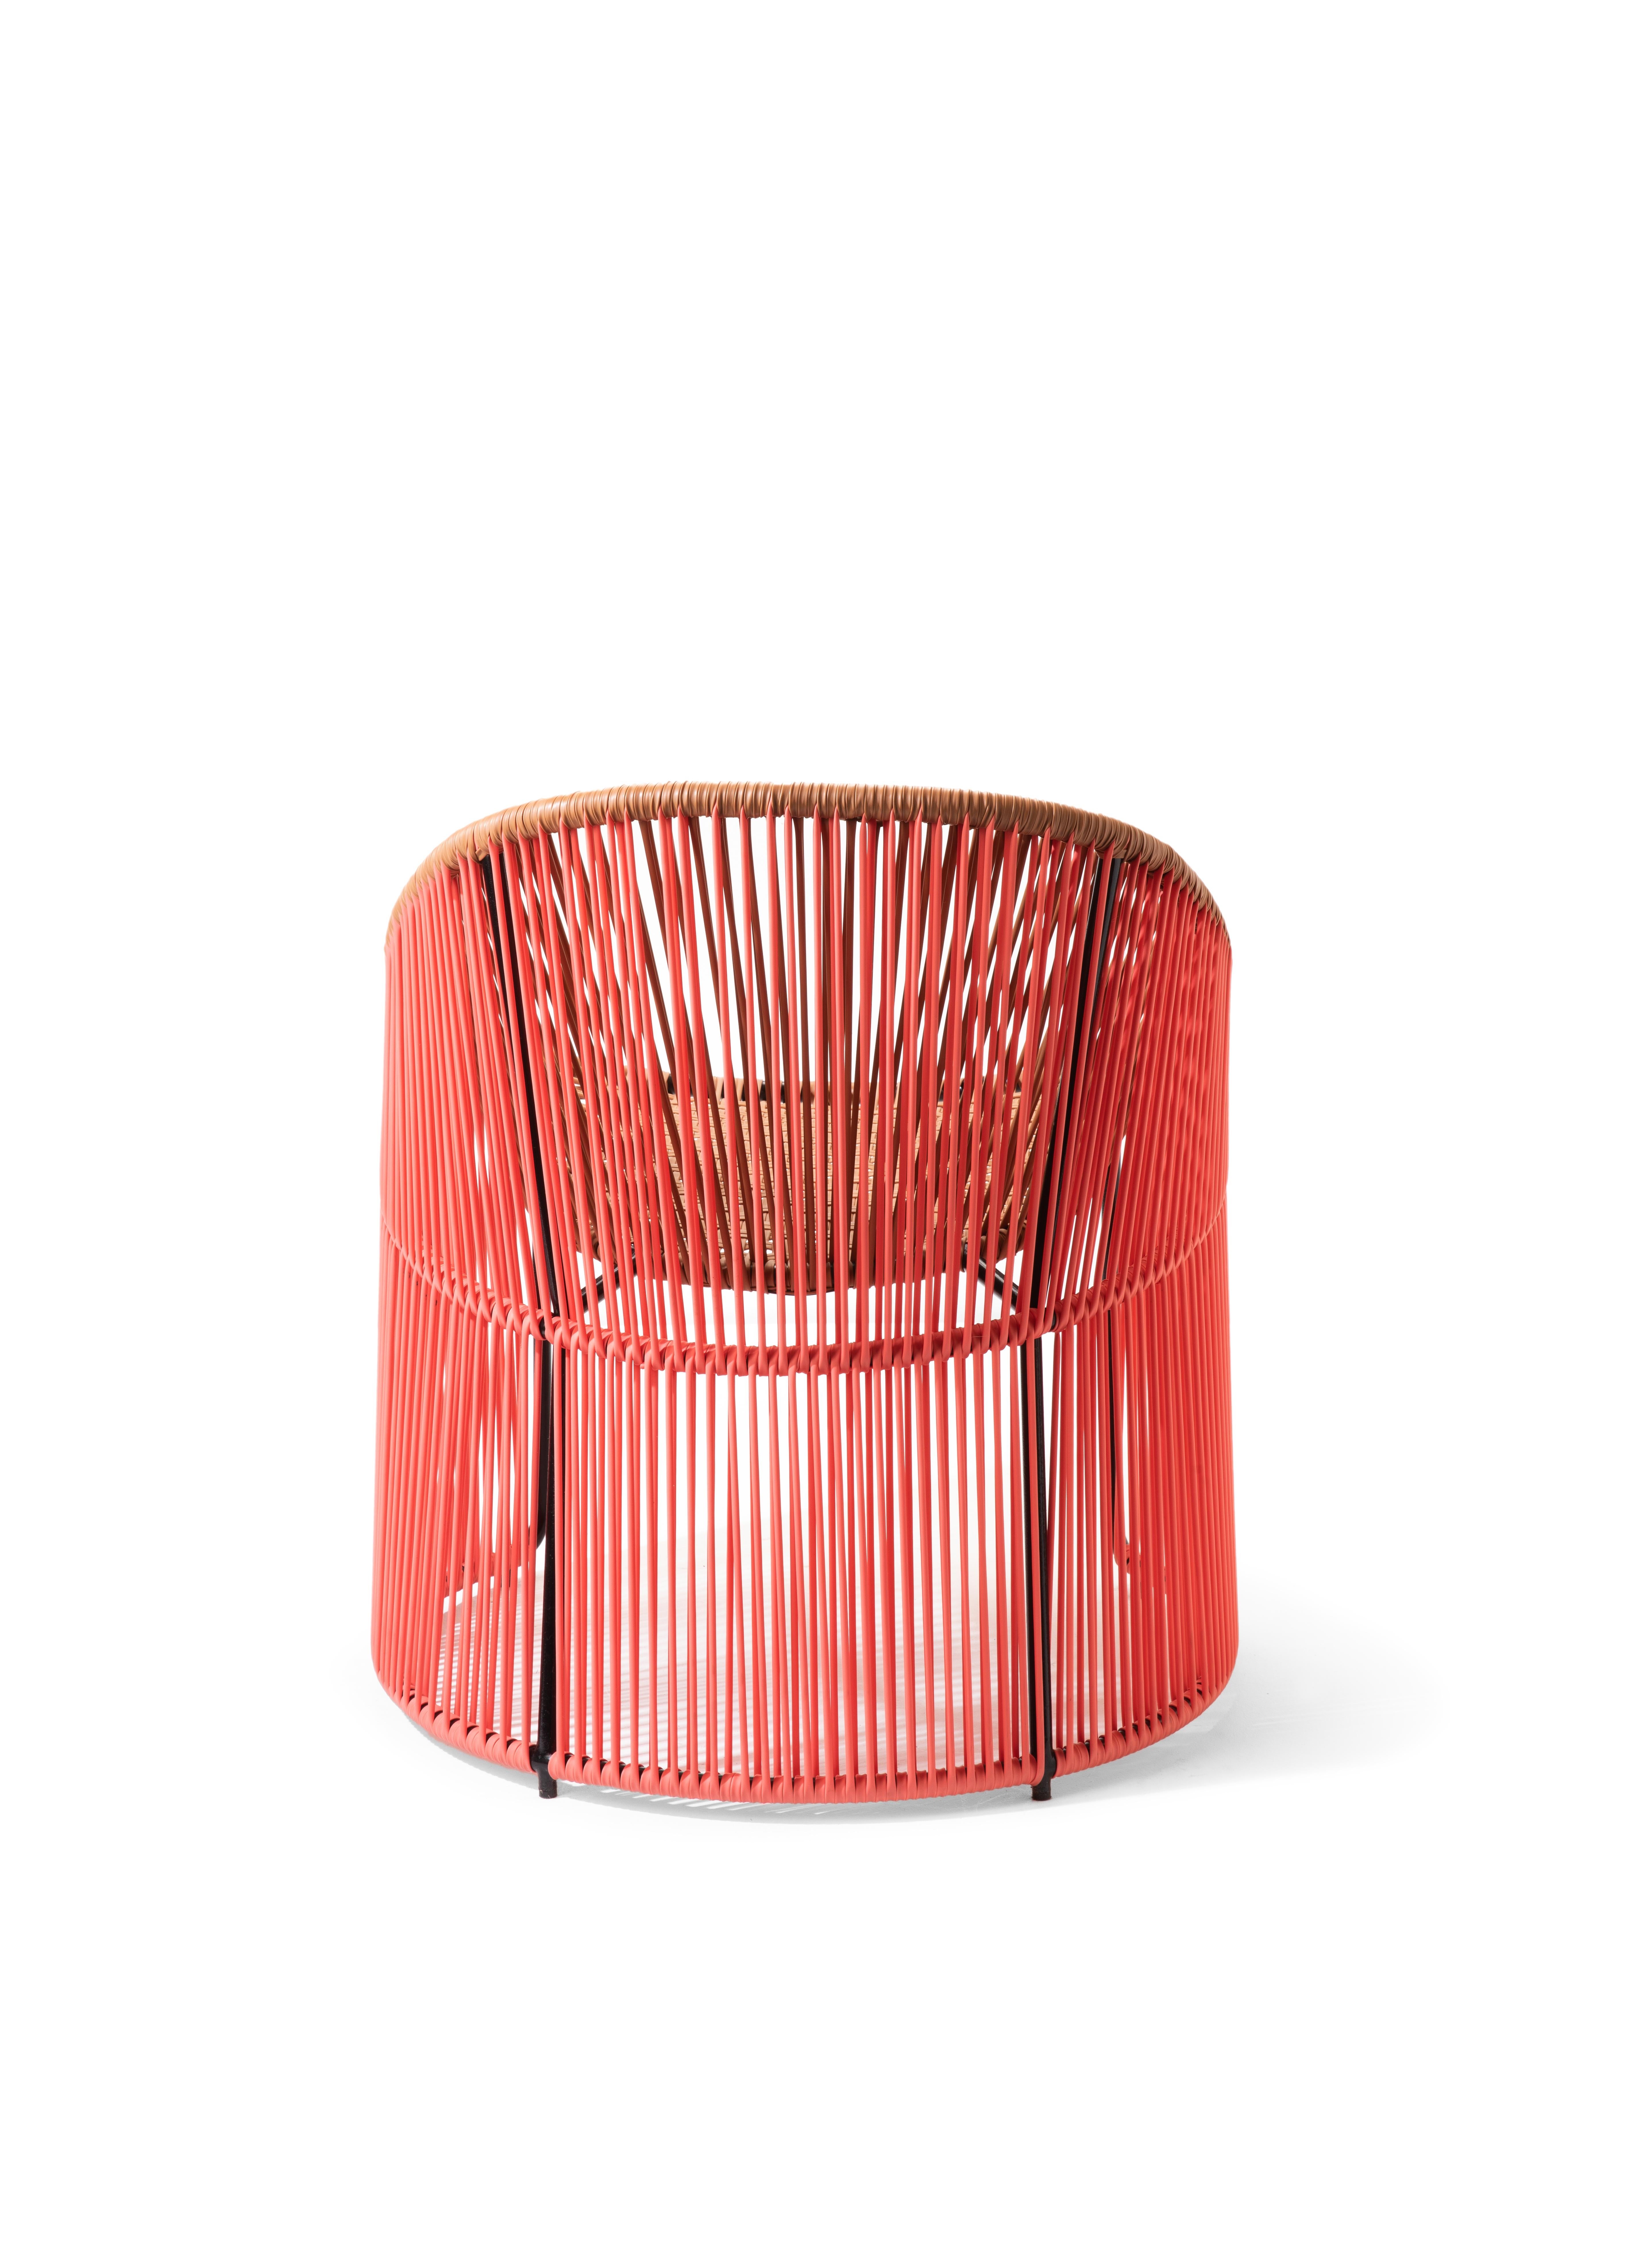 Powder-Coated Coral Cartagenas Lounge Chair by Sebastian Herkner For Sale